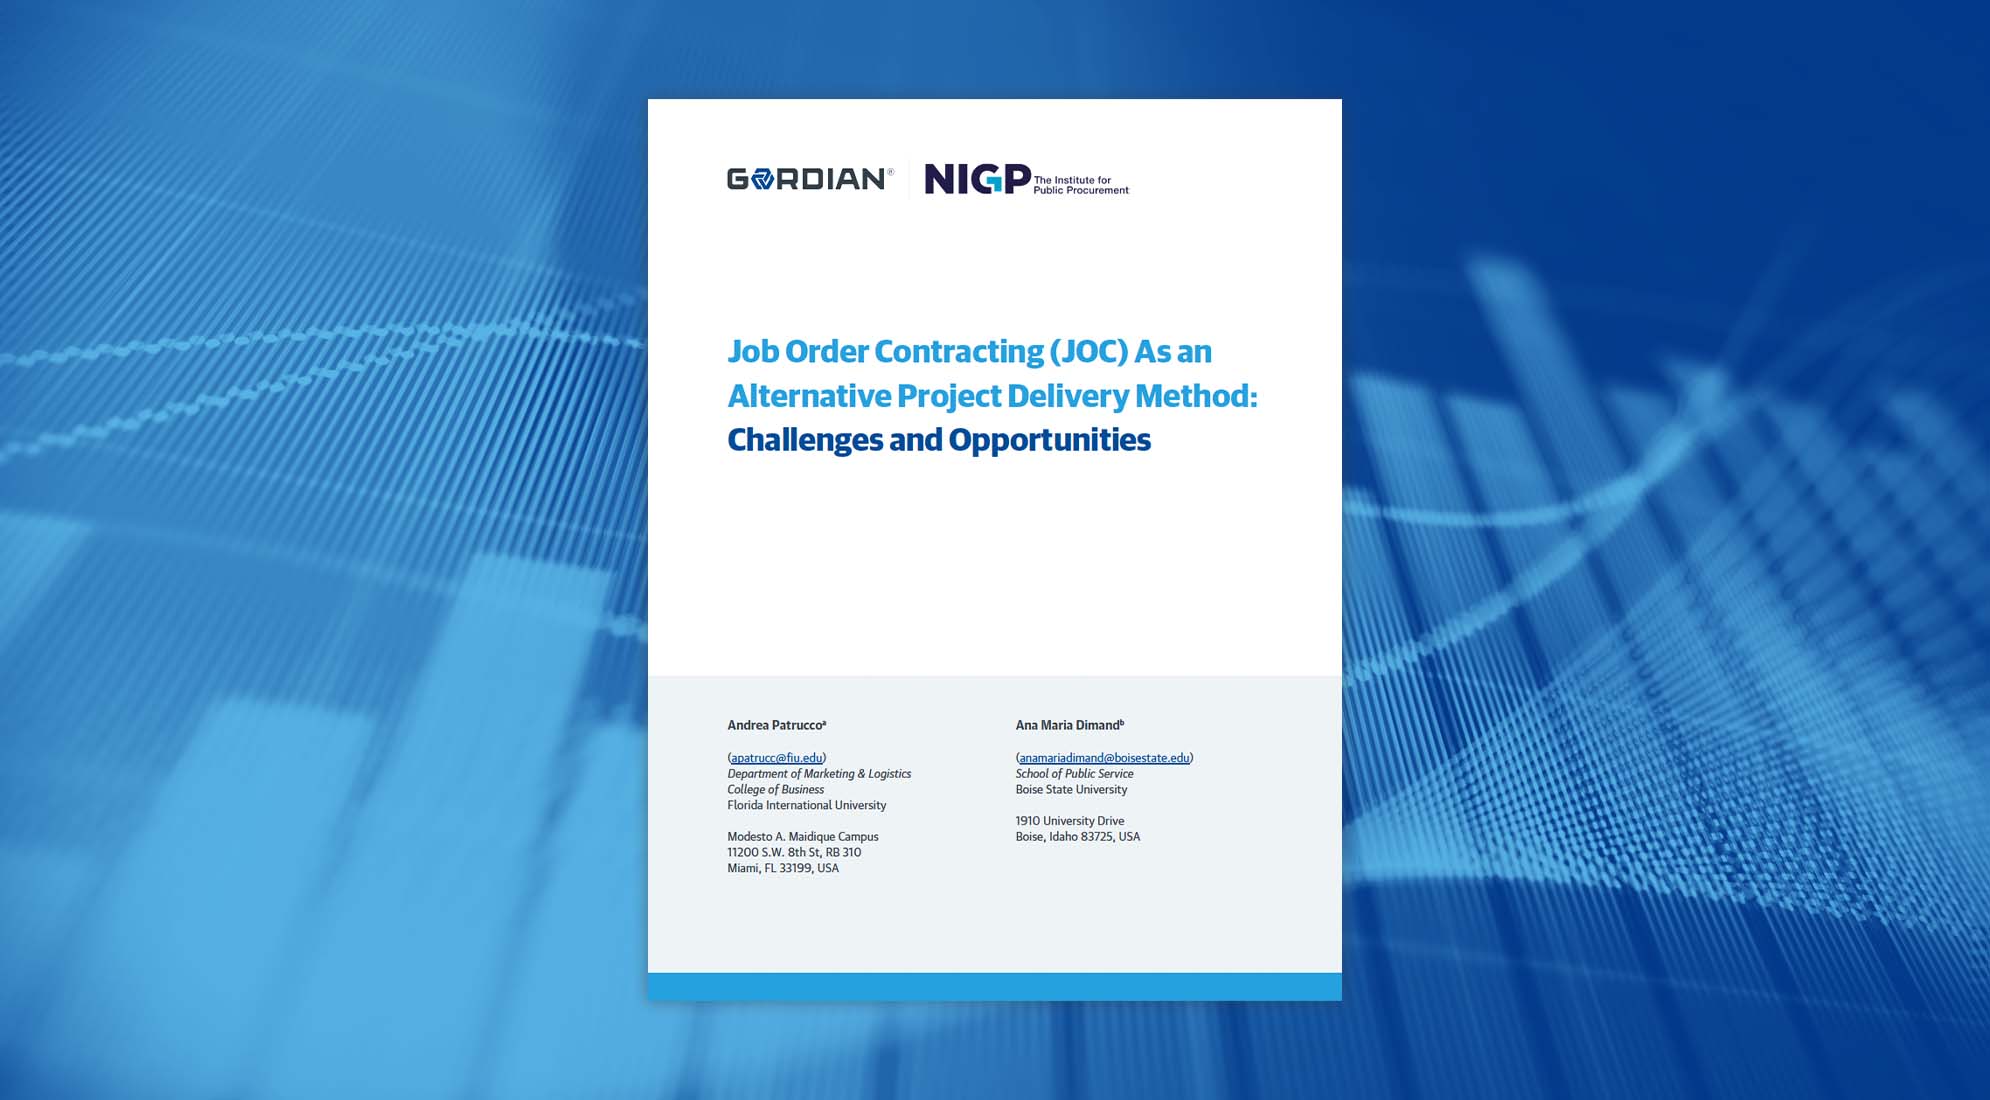 Job Order Contracting (JOC) as an Alternative Project Delivery Method: Challenges and Opportunities 2